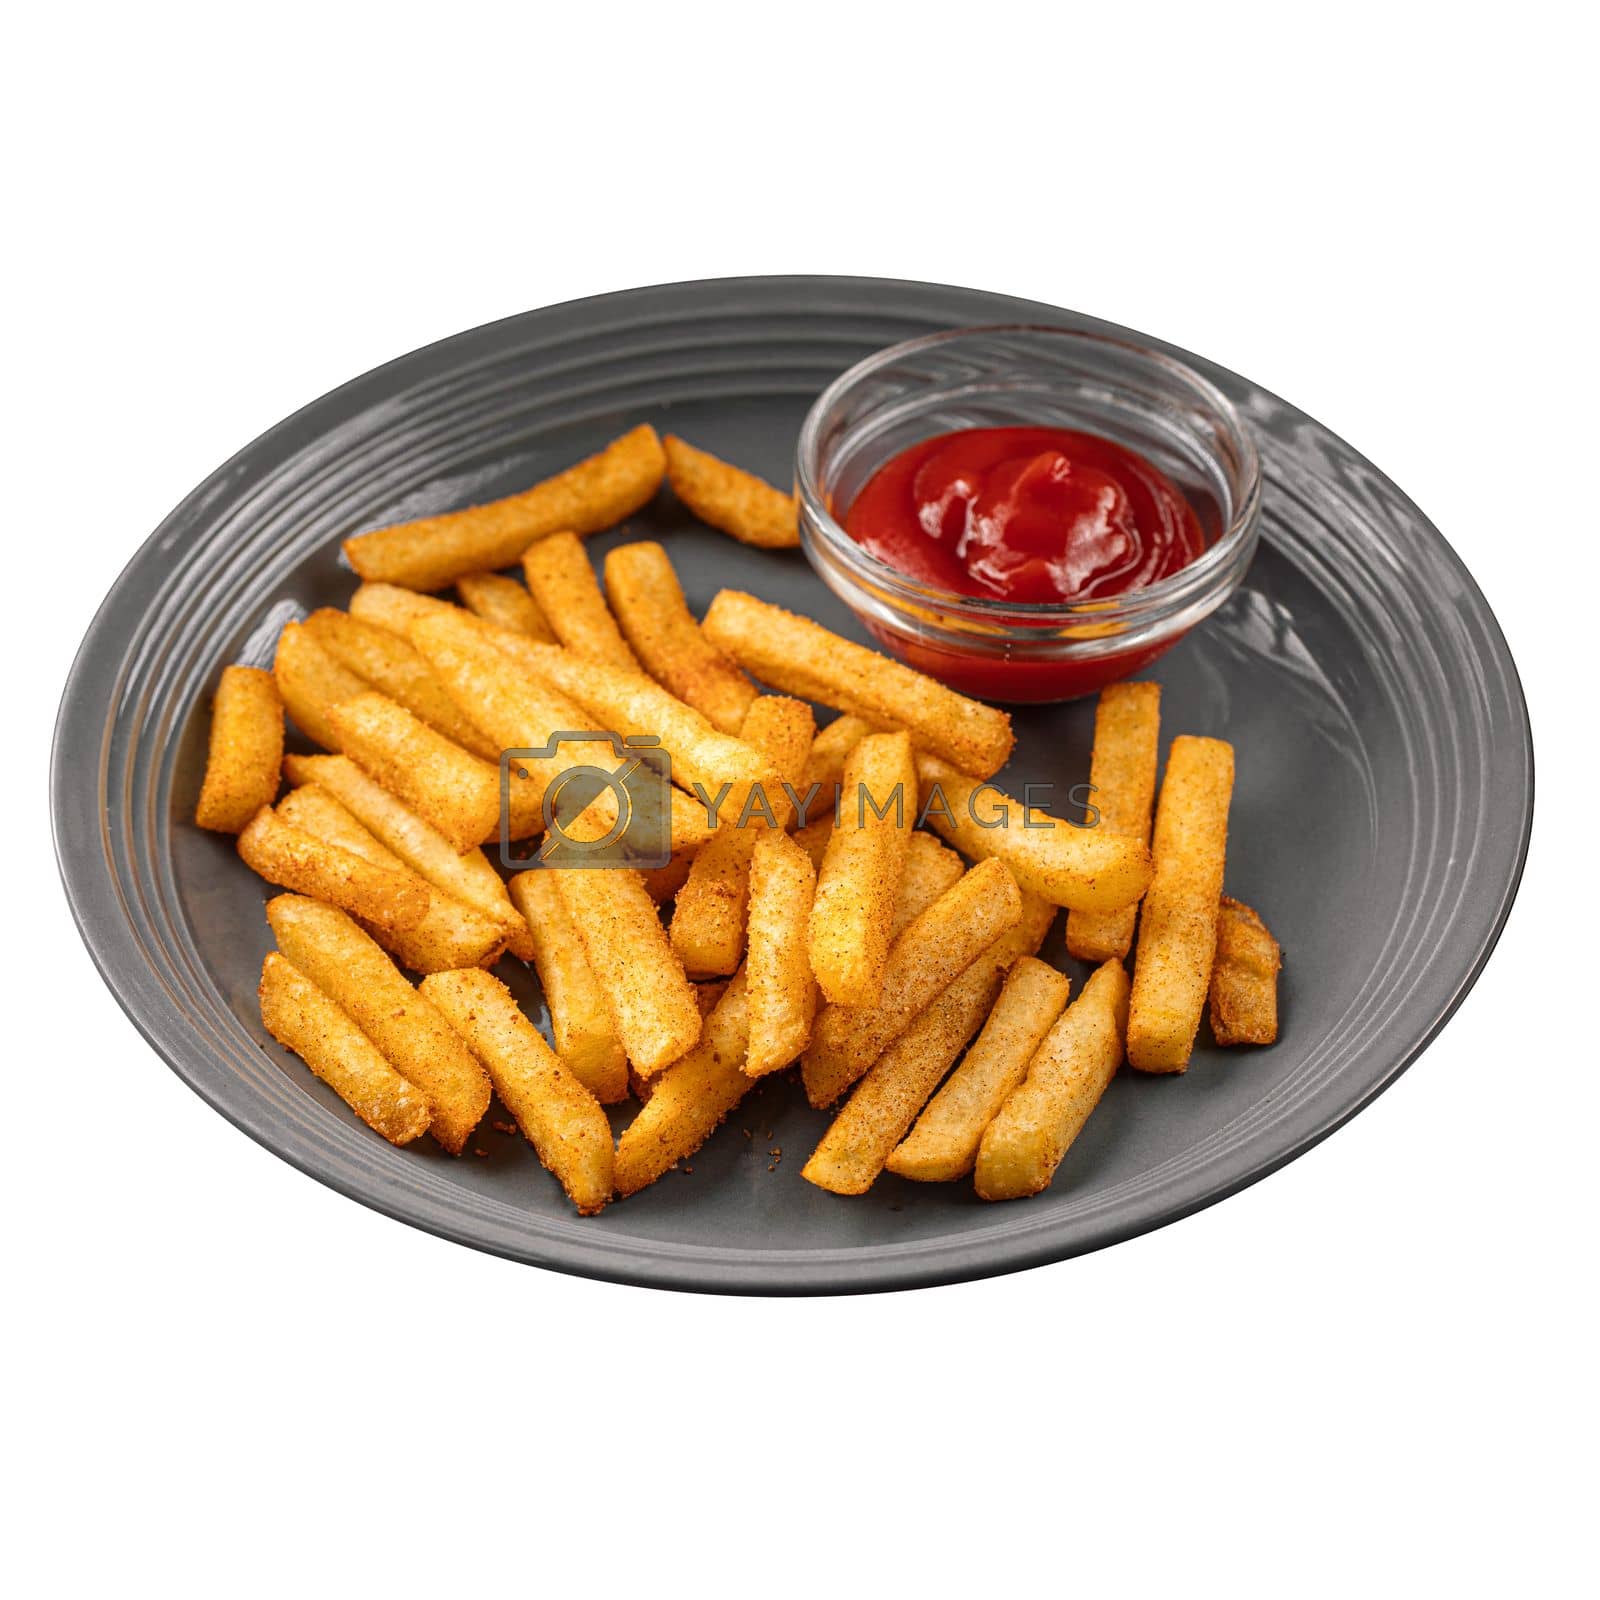 Royalty free image of Isolated portion of french fries by Hihitetlin